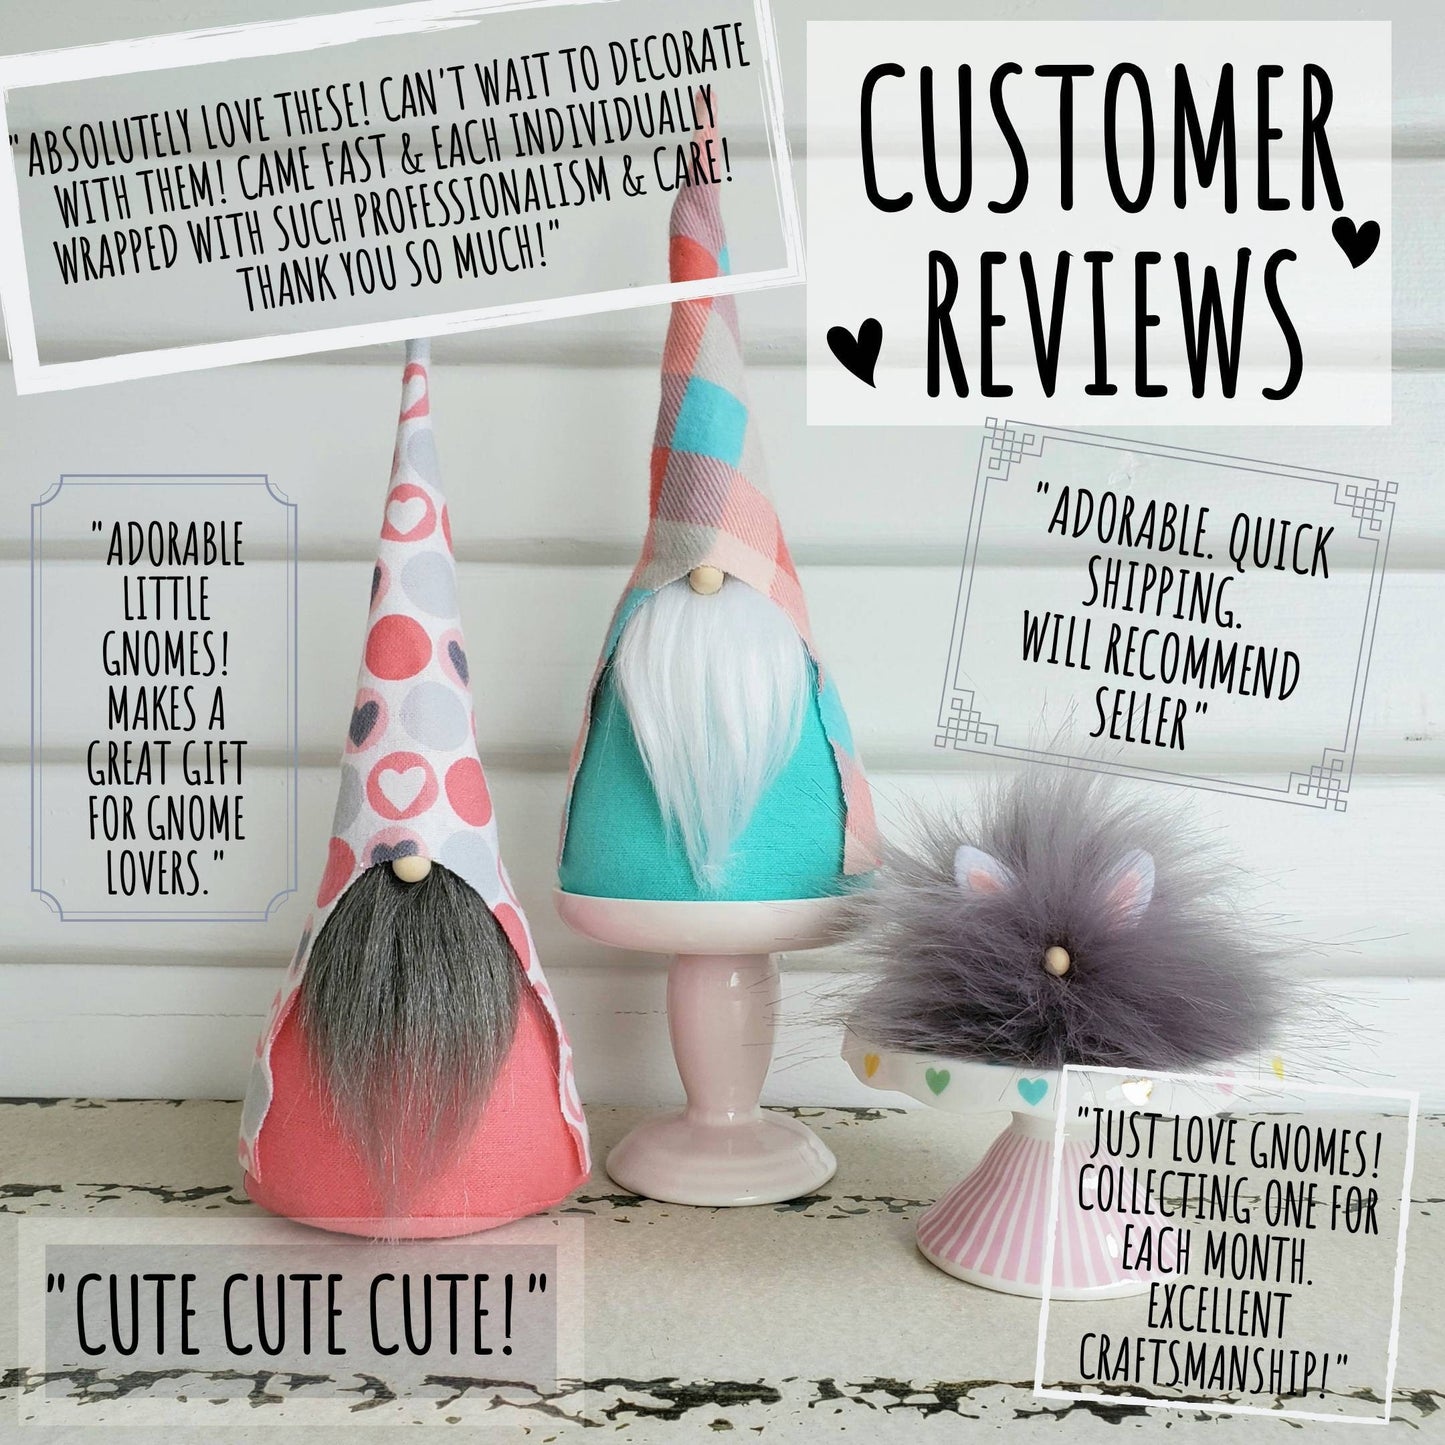 Personal reviews from our Handmade Gnomes